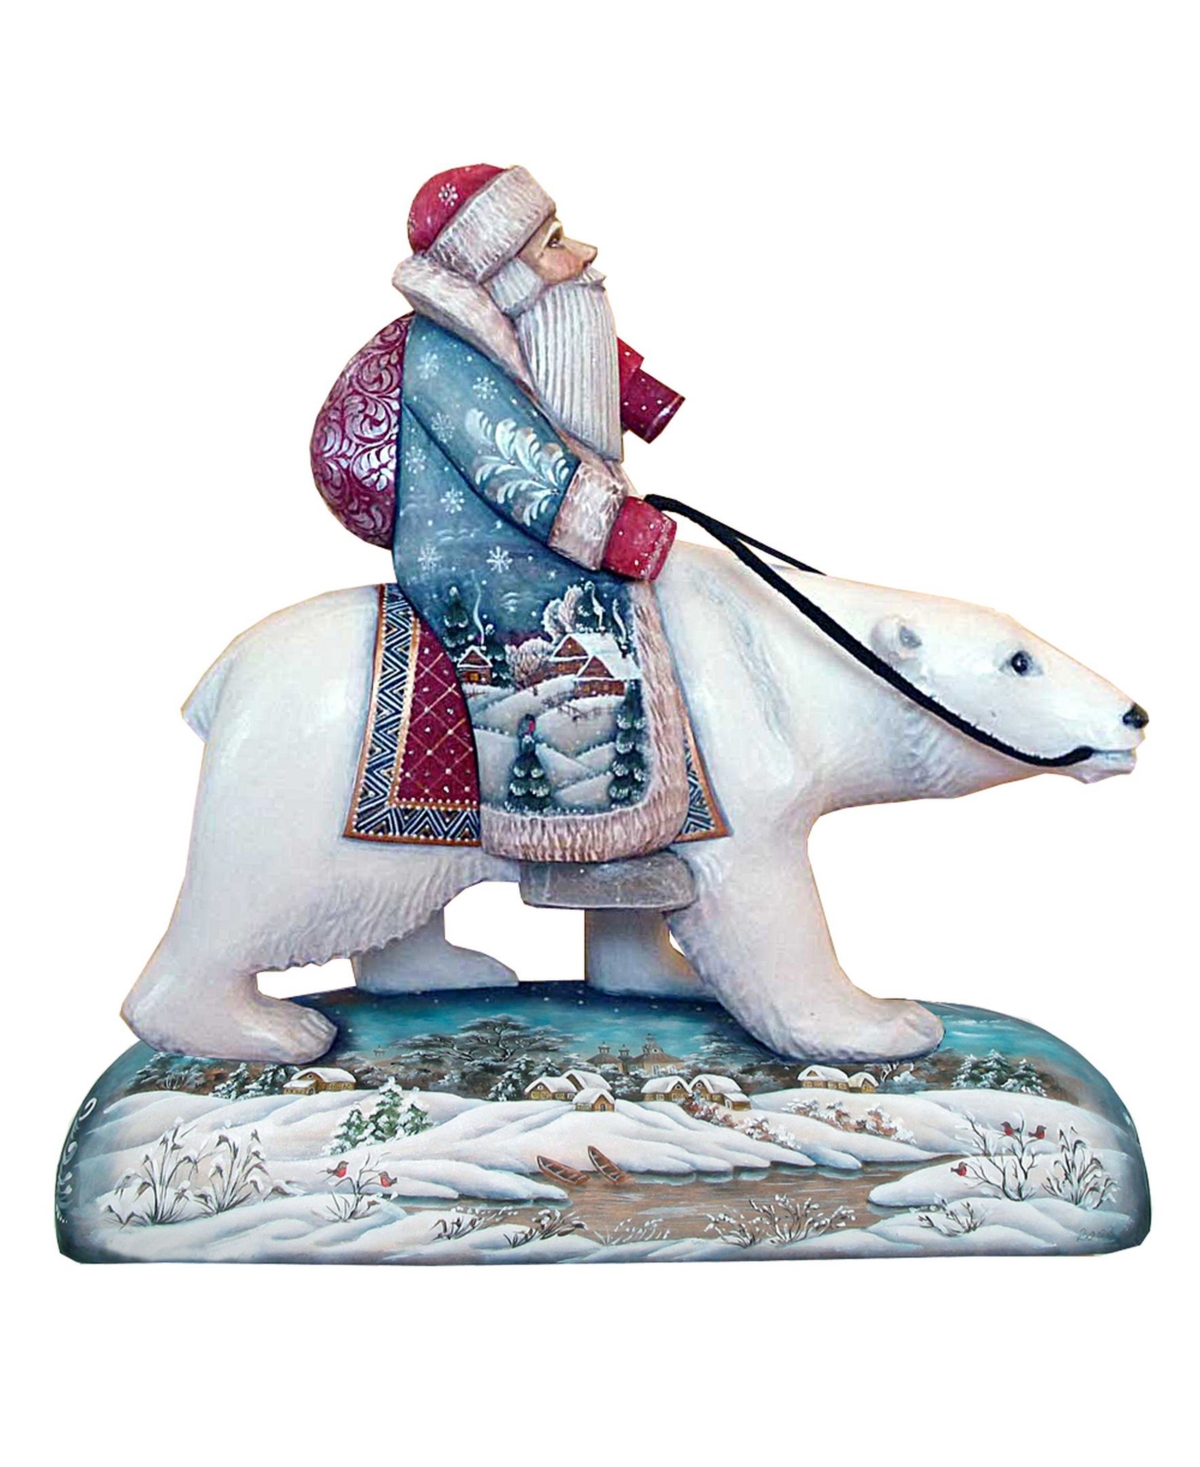 Woodcarved and Hand Painted Polar Bear Santa Claus Figurine - Multi